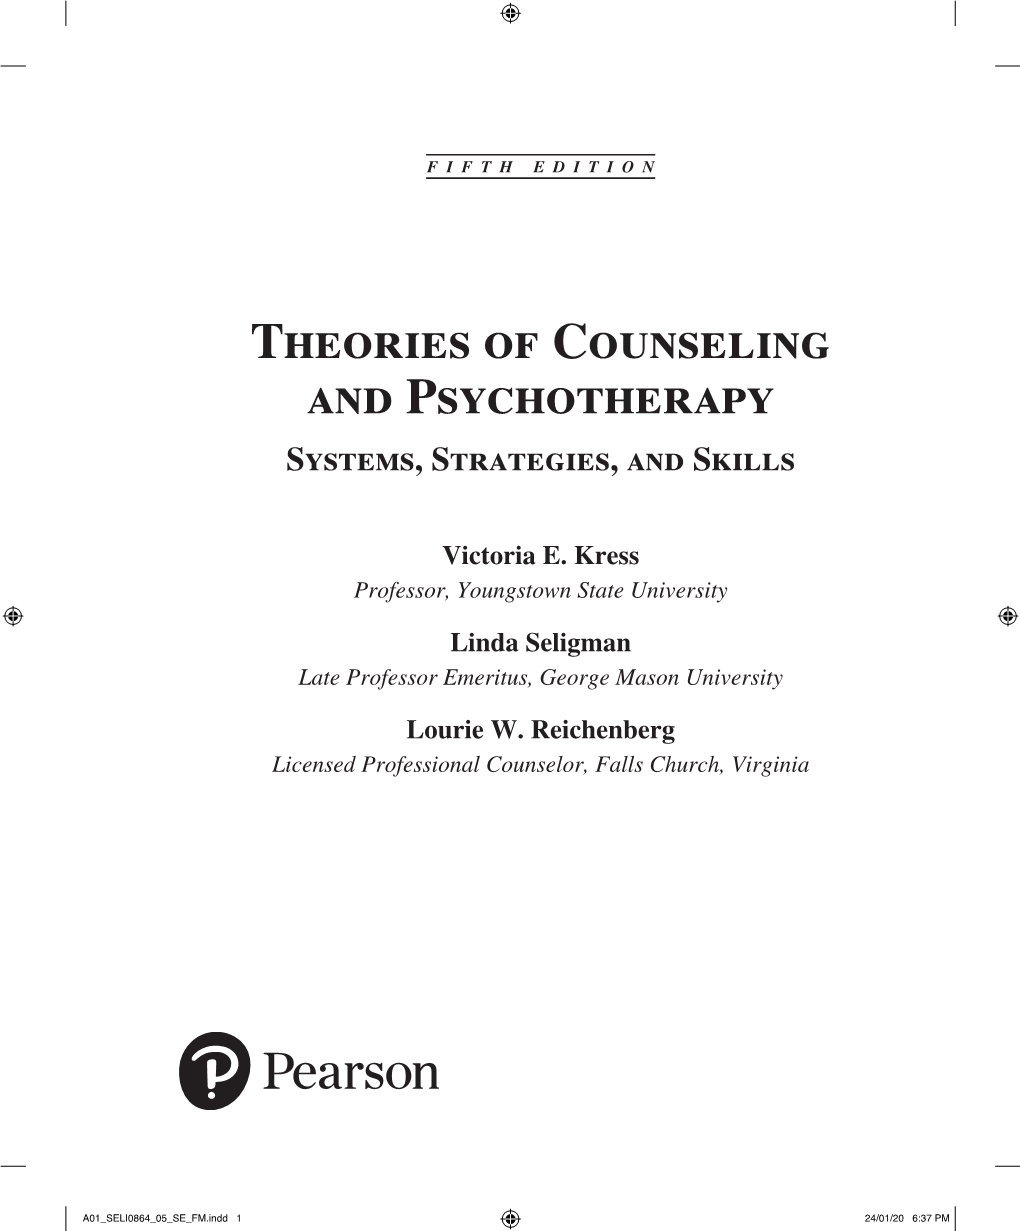 Theories of Counseling and Psychotherapy Systems, Strategies, and Skills